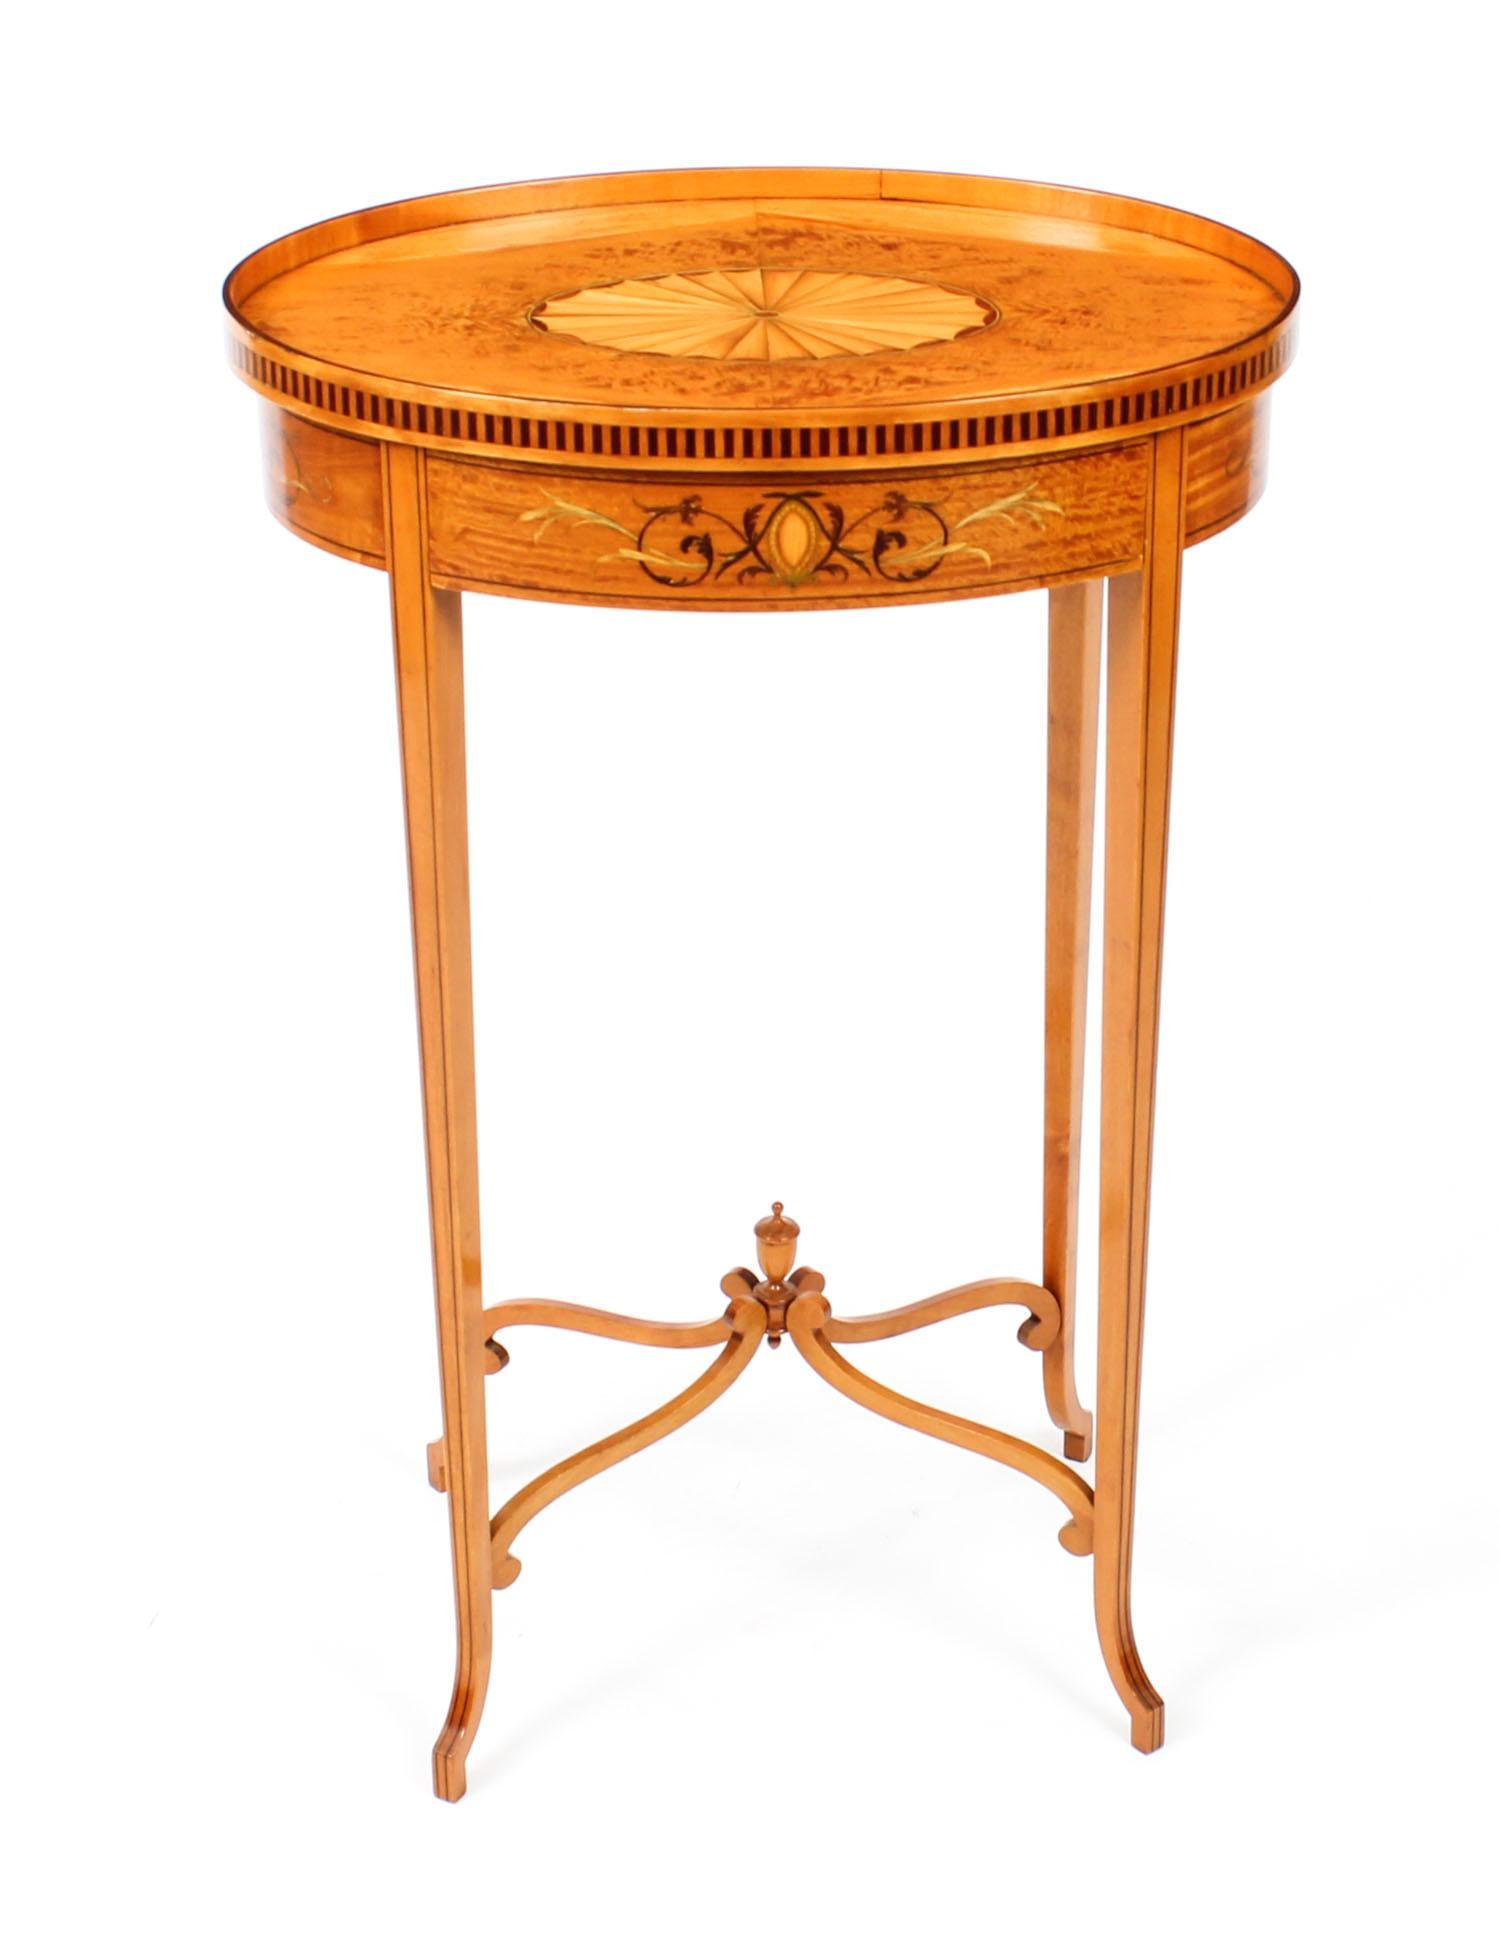 This is a superb antique satinwood oval occasional table, circa 1880 in date.

The table is exquisitely crafted in a rich satinwood, it features shell and floral marquetry with ebony line inlaid decoration throughout, it has a useful drawer in the